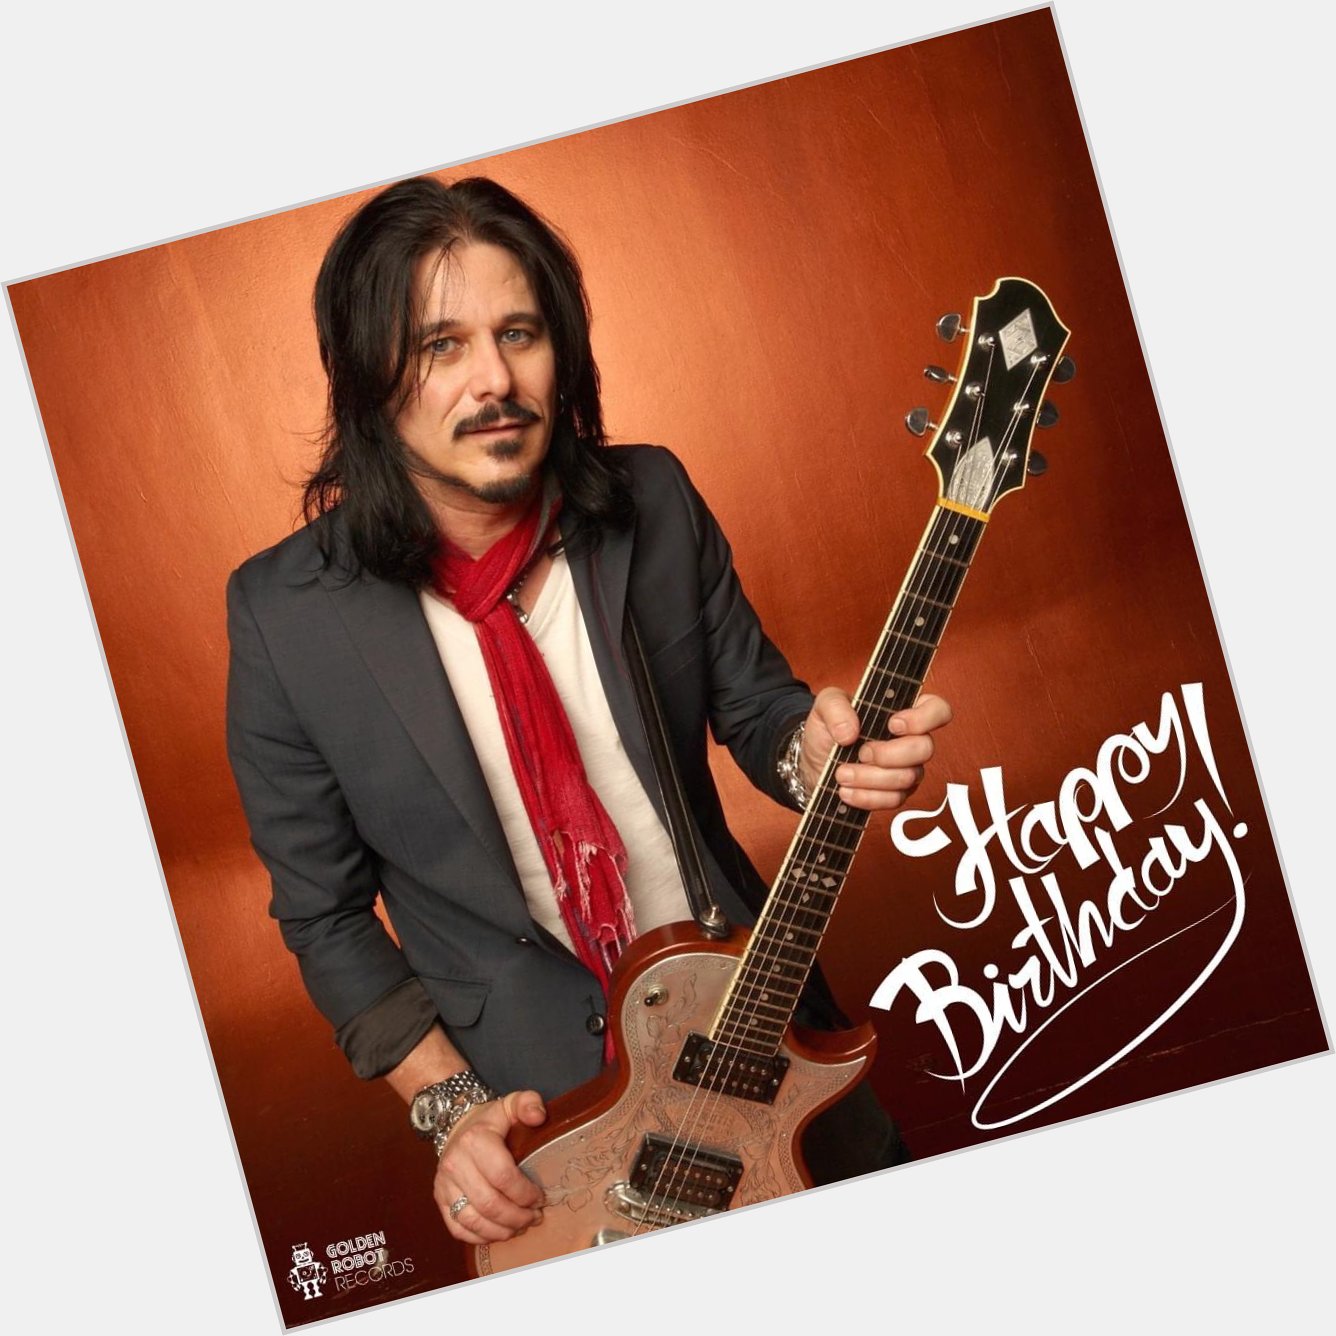 Golden Robot Records
Happy birthday to the man, the myth, the legend, Gilby Clarke!

Have a good one!  